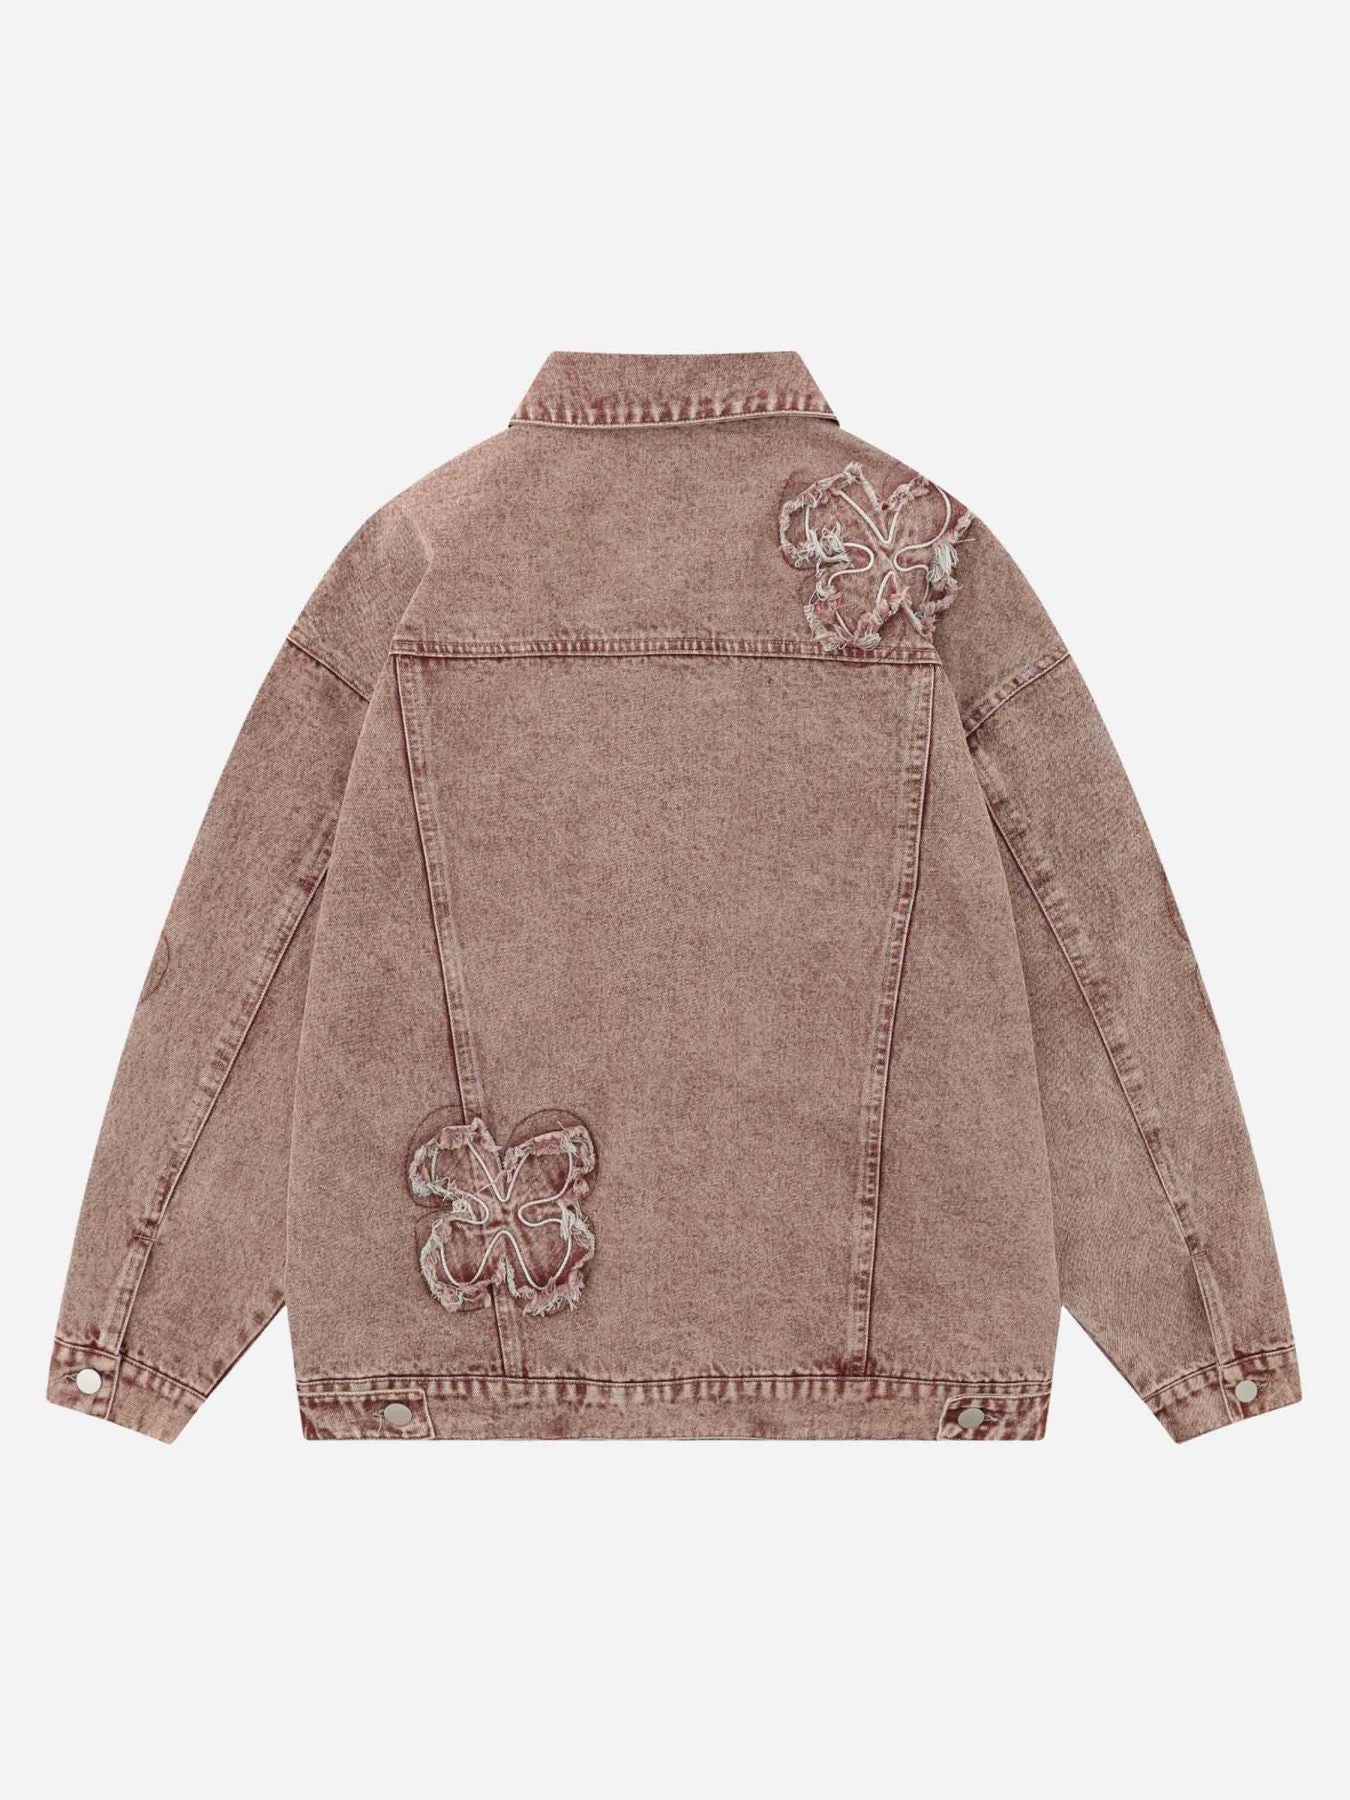 The Supermade Floral Patch Embroidered Denim Jacket